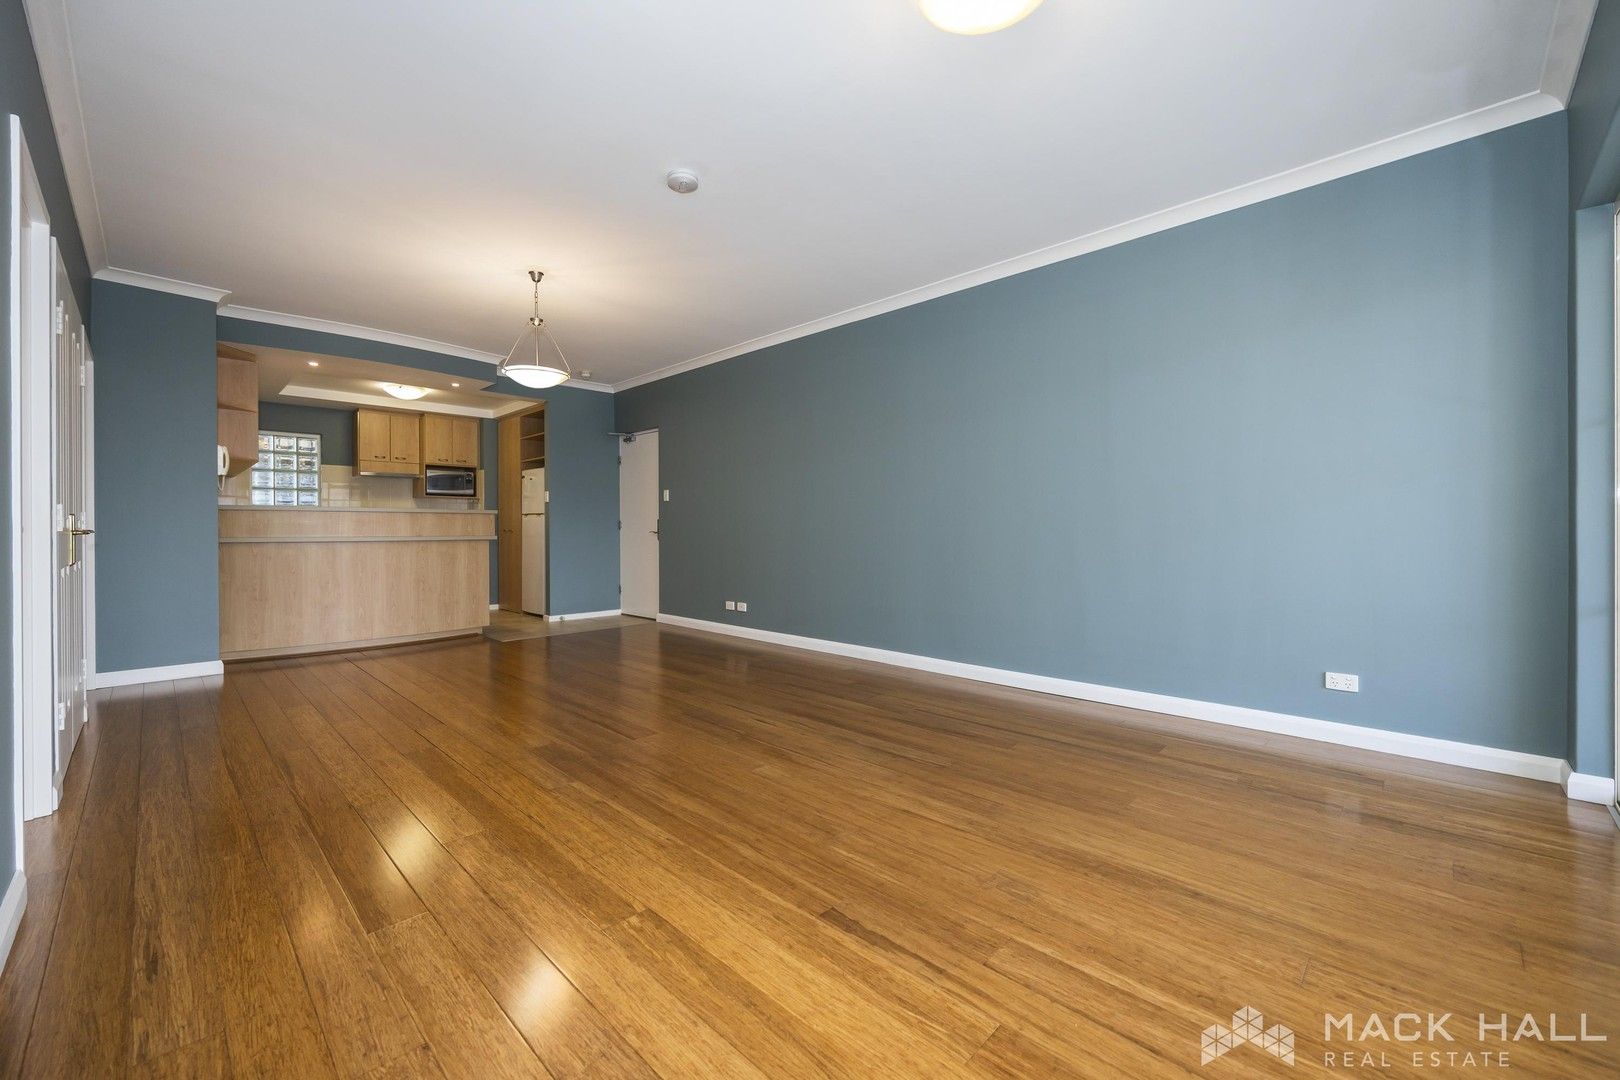 2 bedrooms Apartment / Unit / Flat in 13/611 Murray Street WEST PERTH WA, 6005